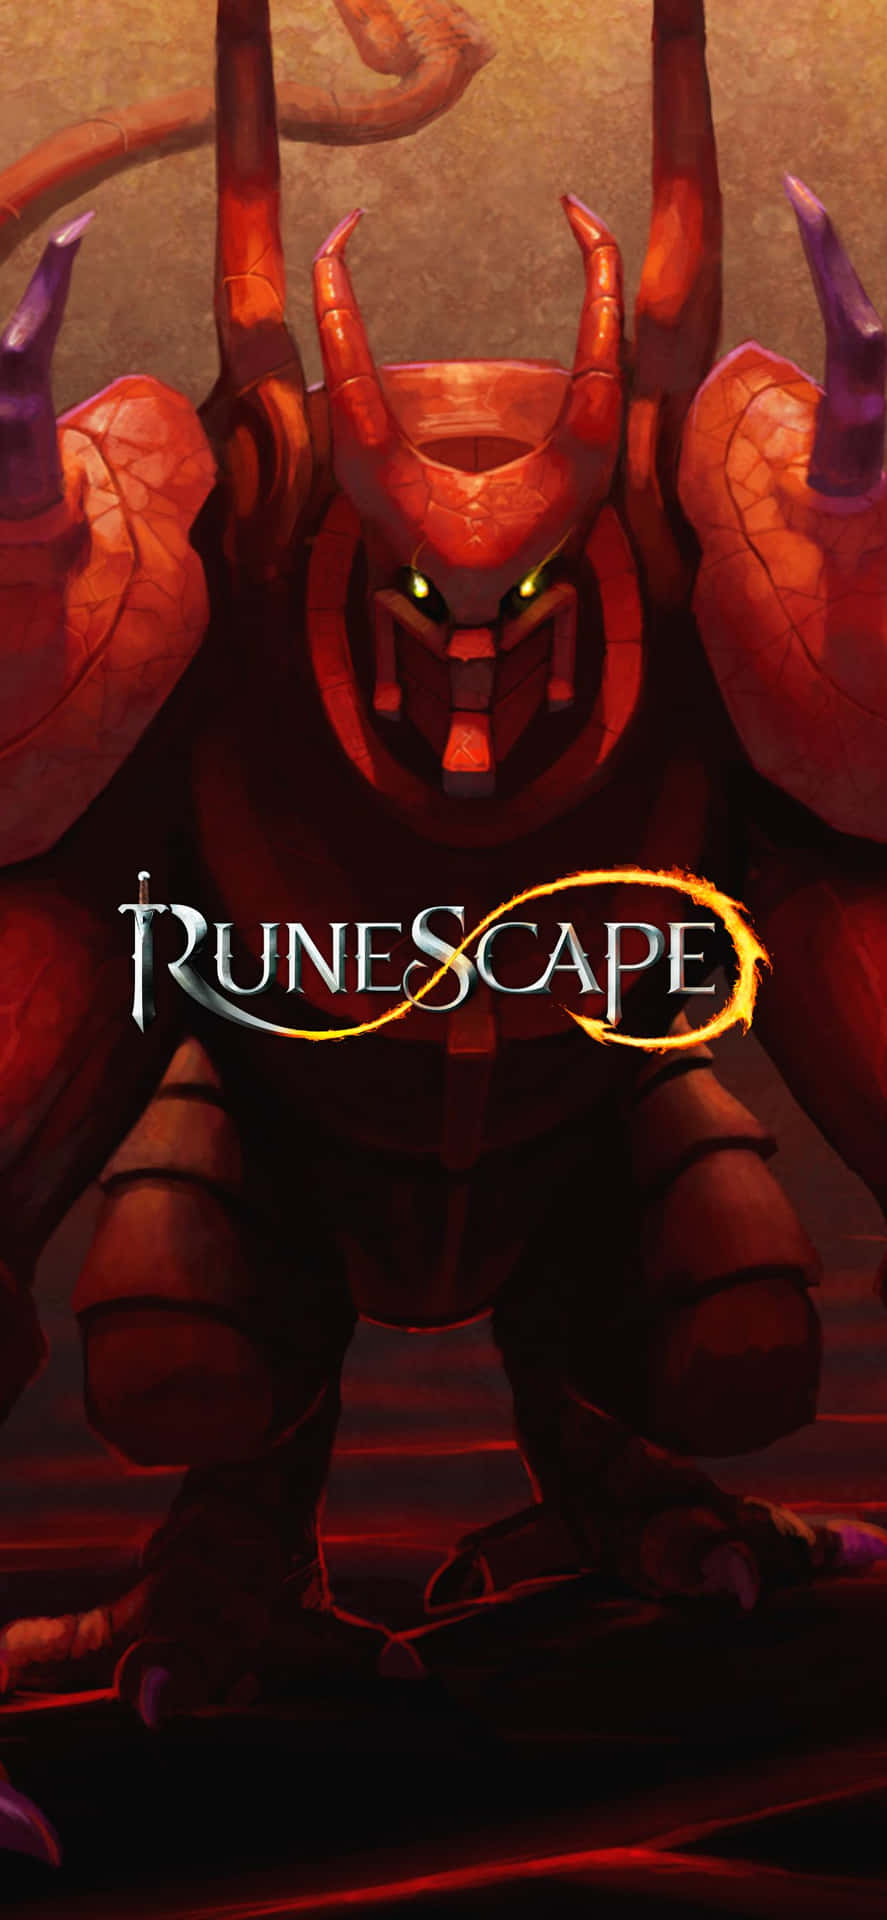 Runescape - A Demon With A Red Horn